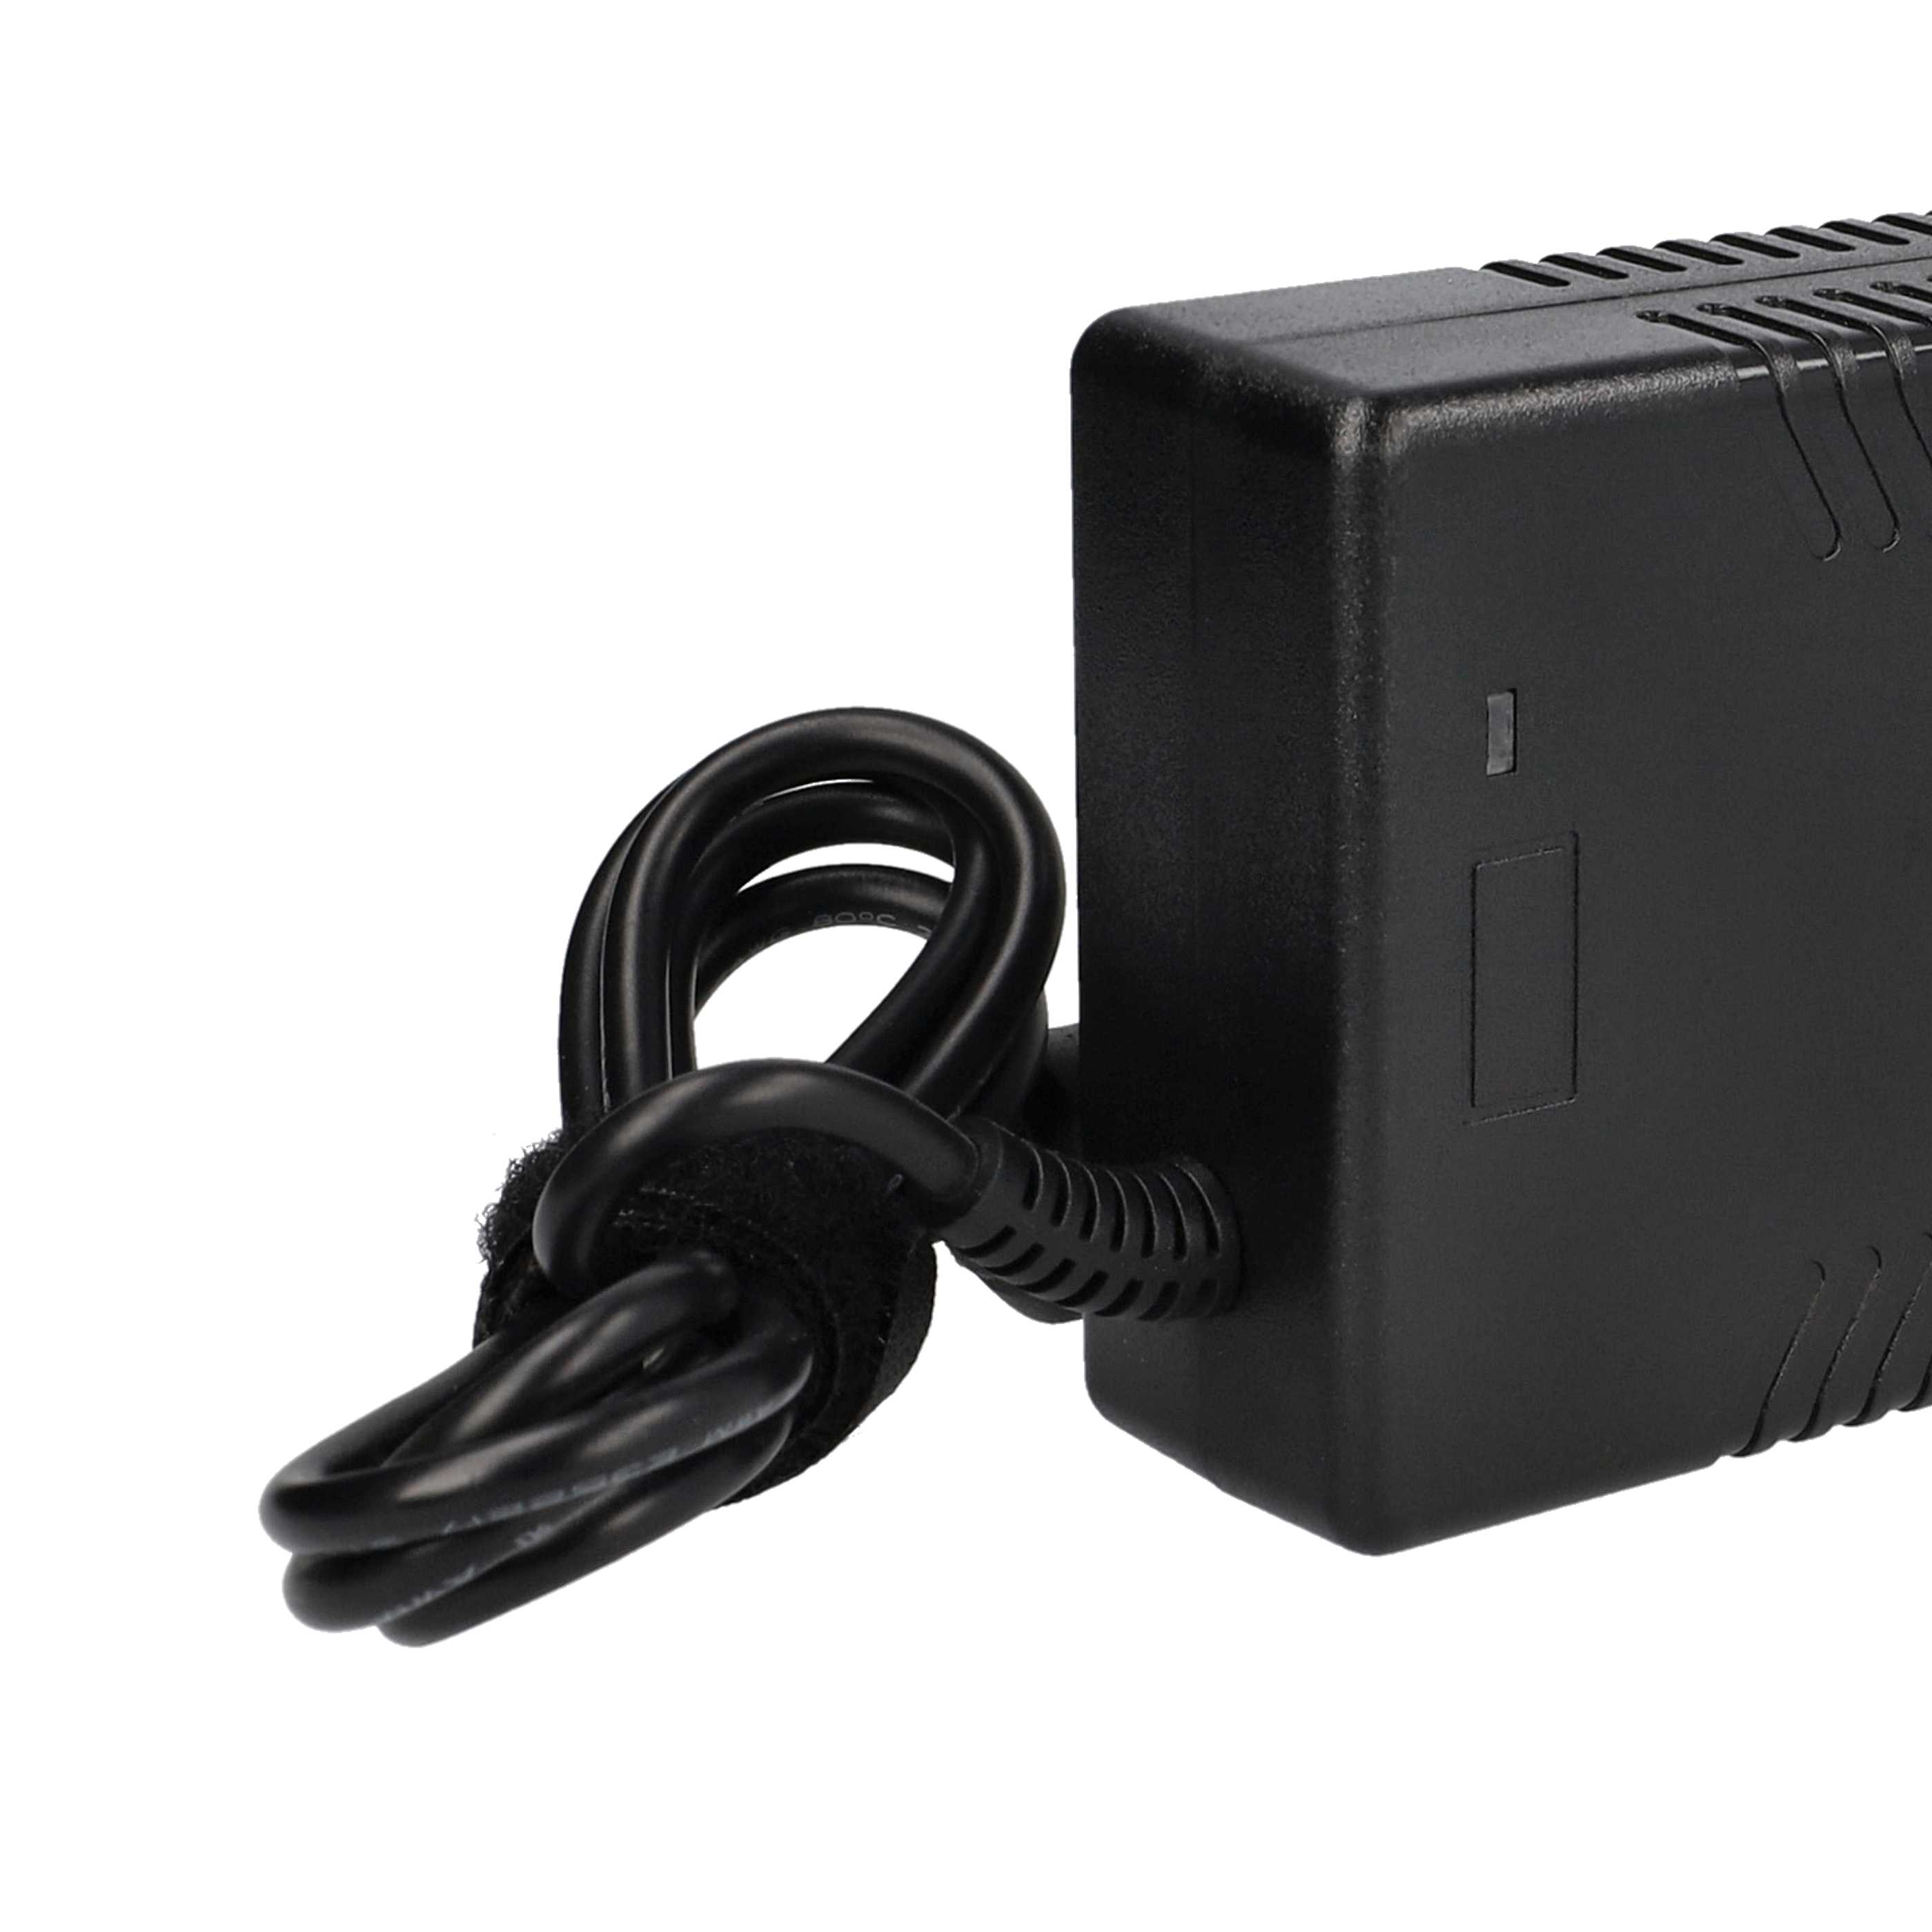 Mains Power Adapter replaces PA-1121-01, PA-1121-02 for GericomNotebook etc., 120 W